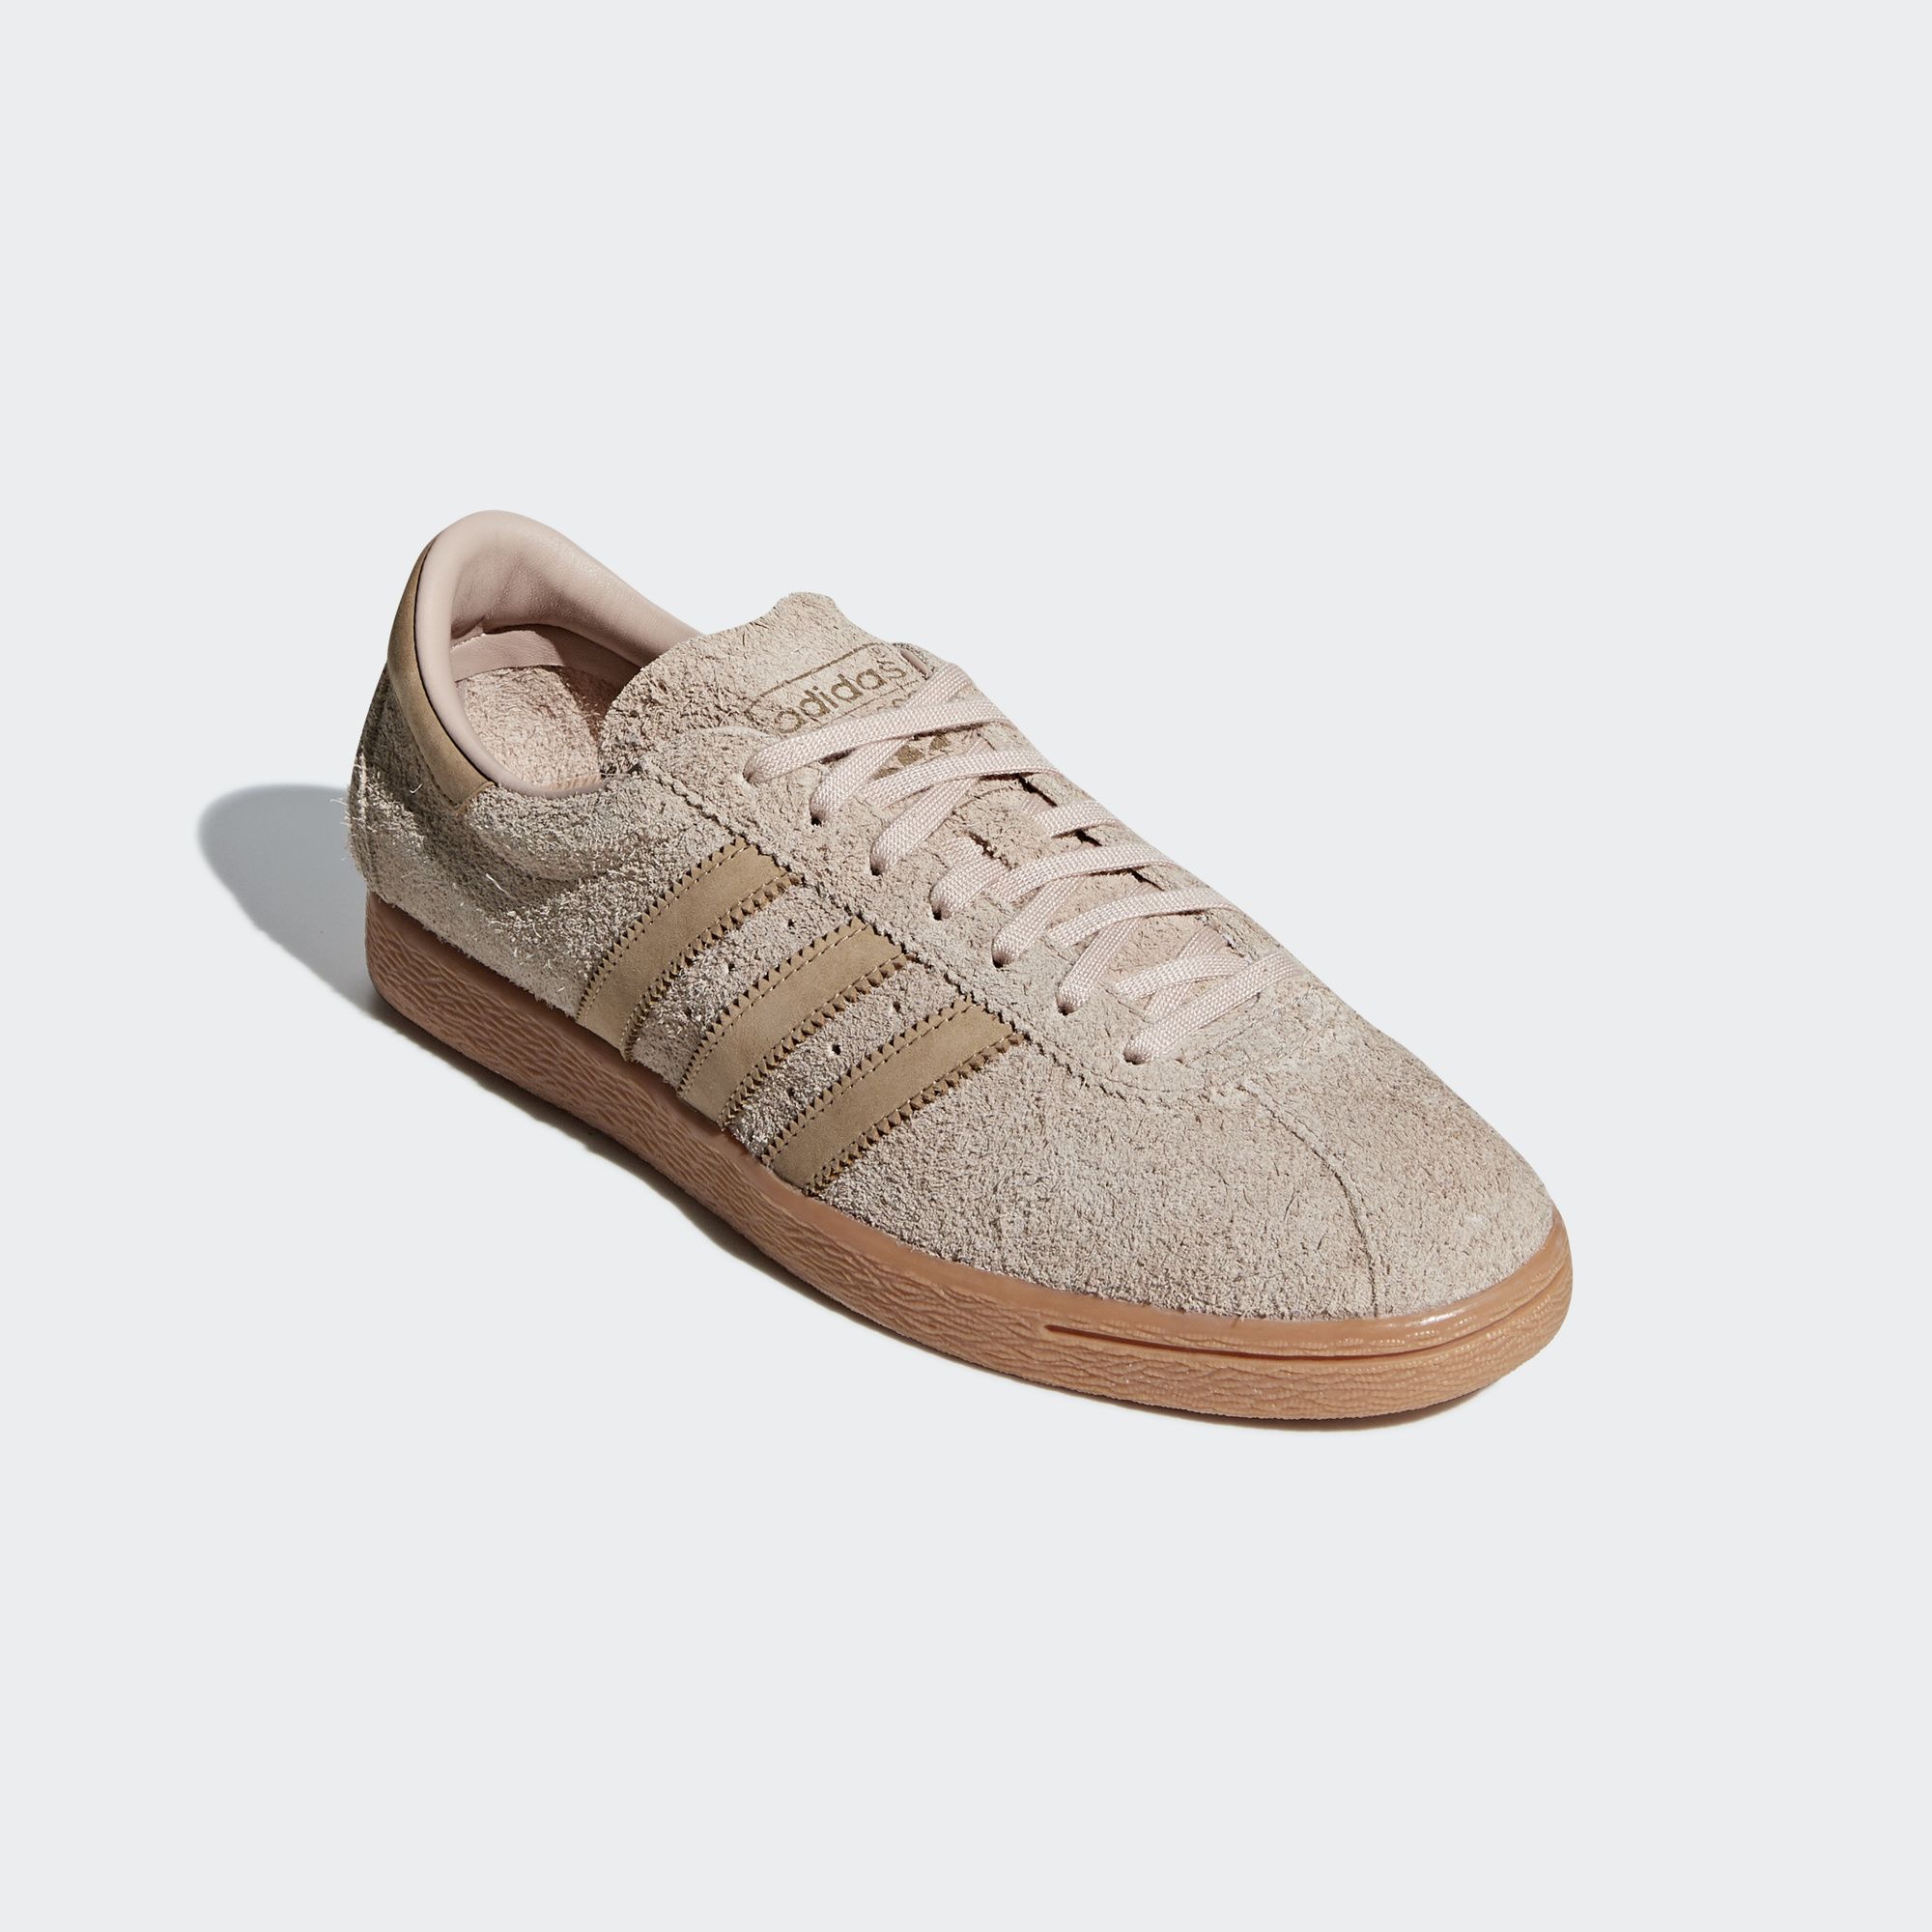 adidas tobacco review